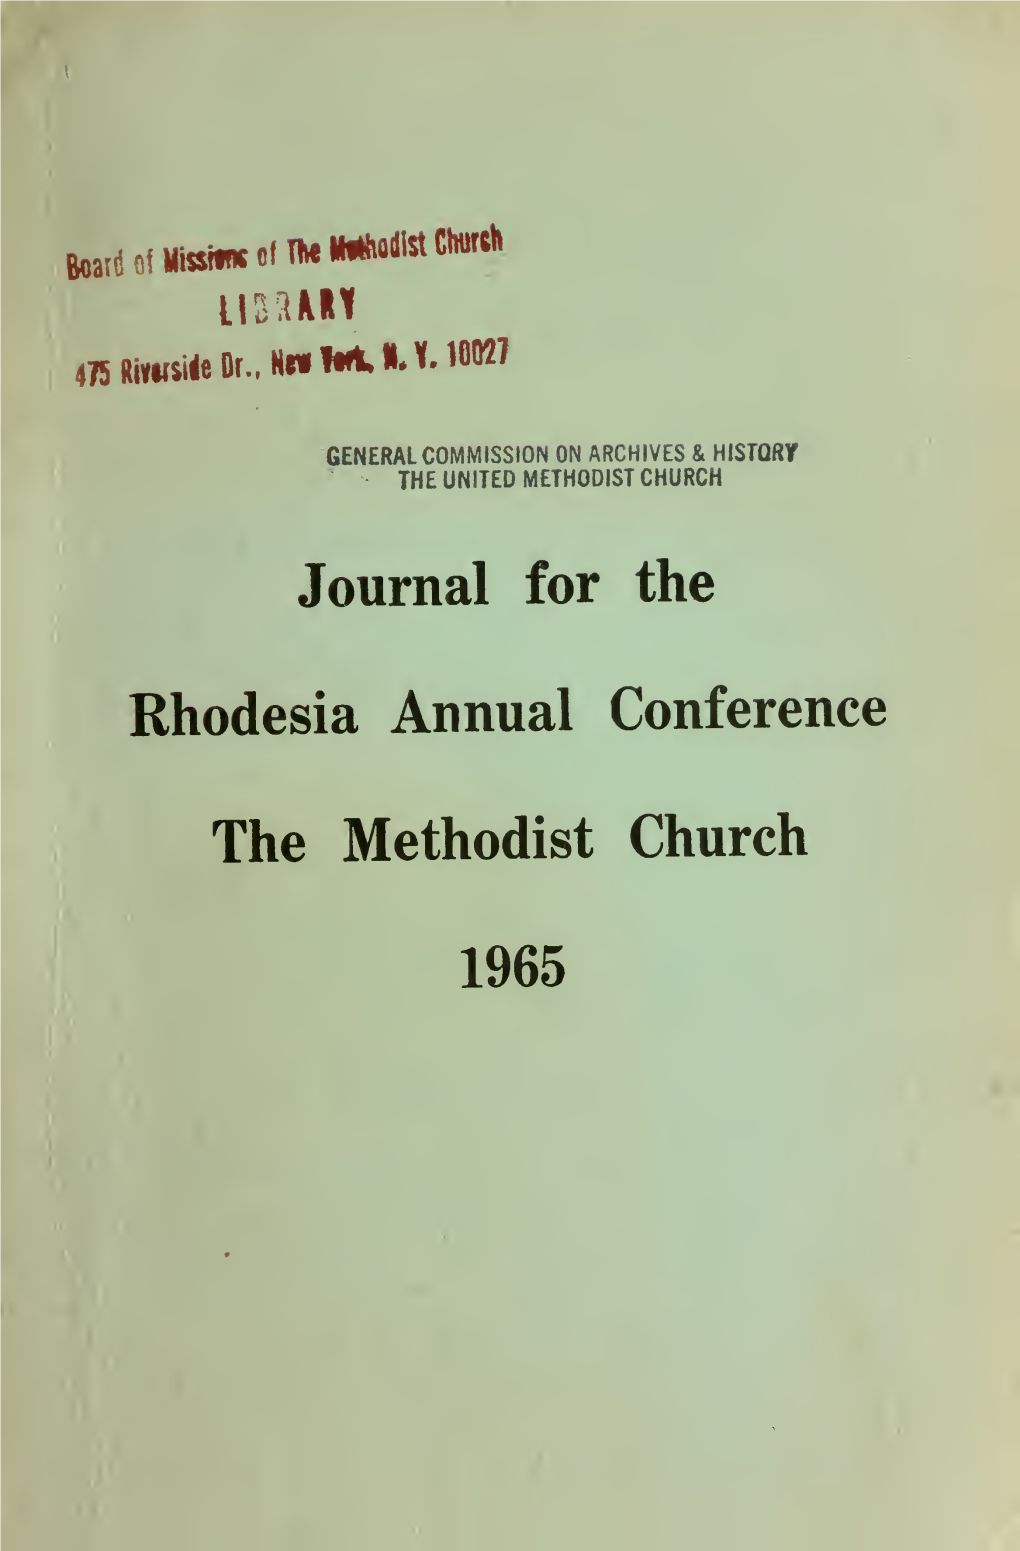 Official Journal of the Twenty-Seventh Session of the Rhodesia Annual